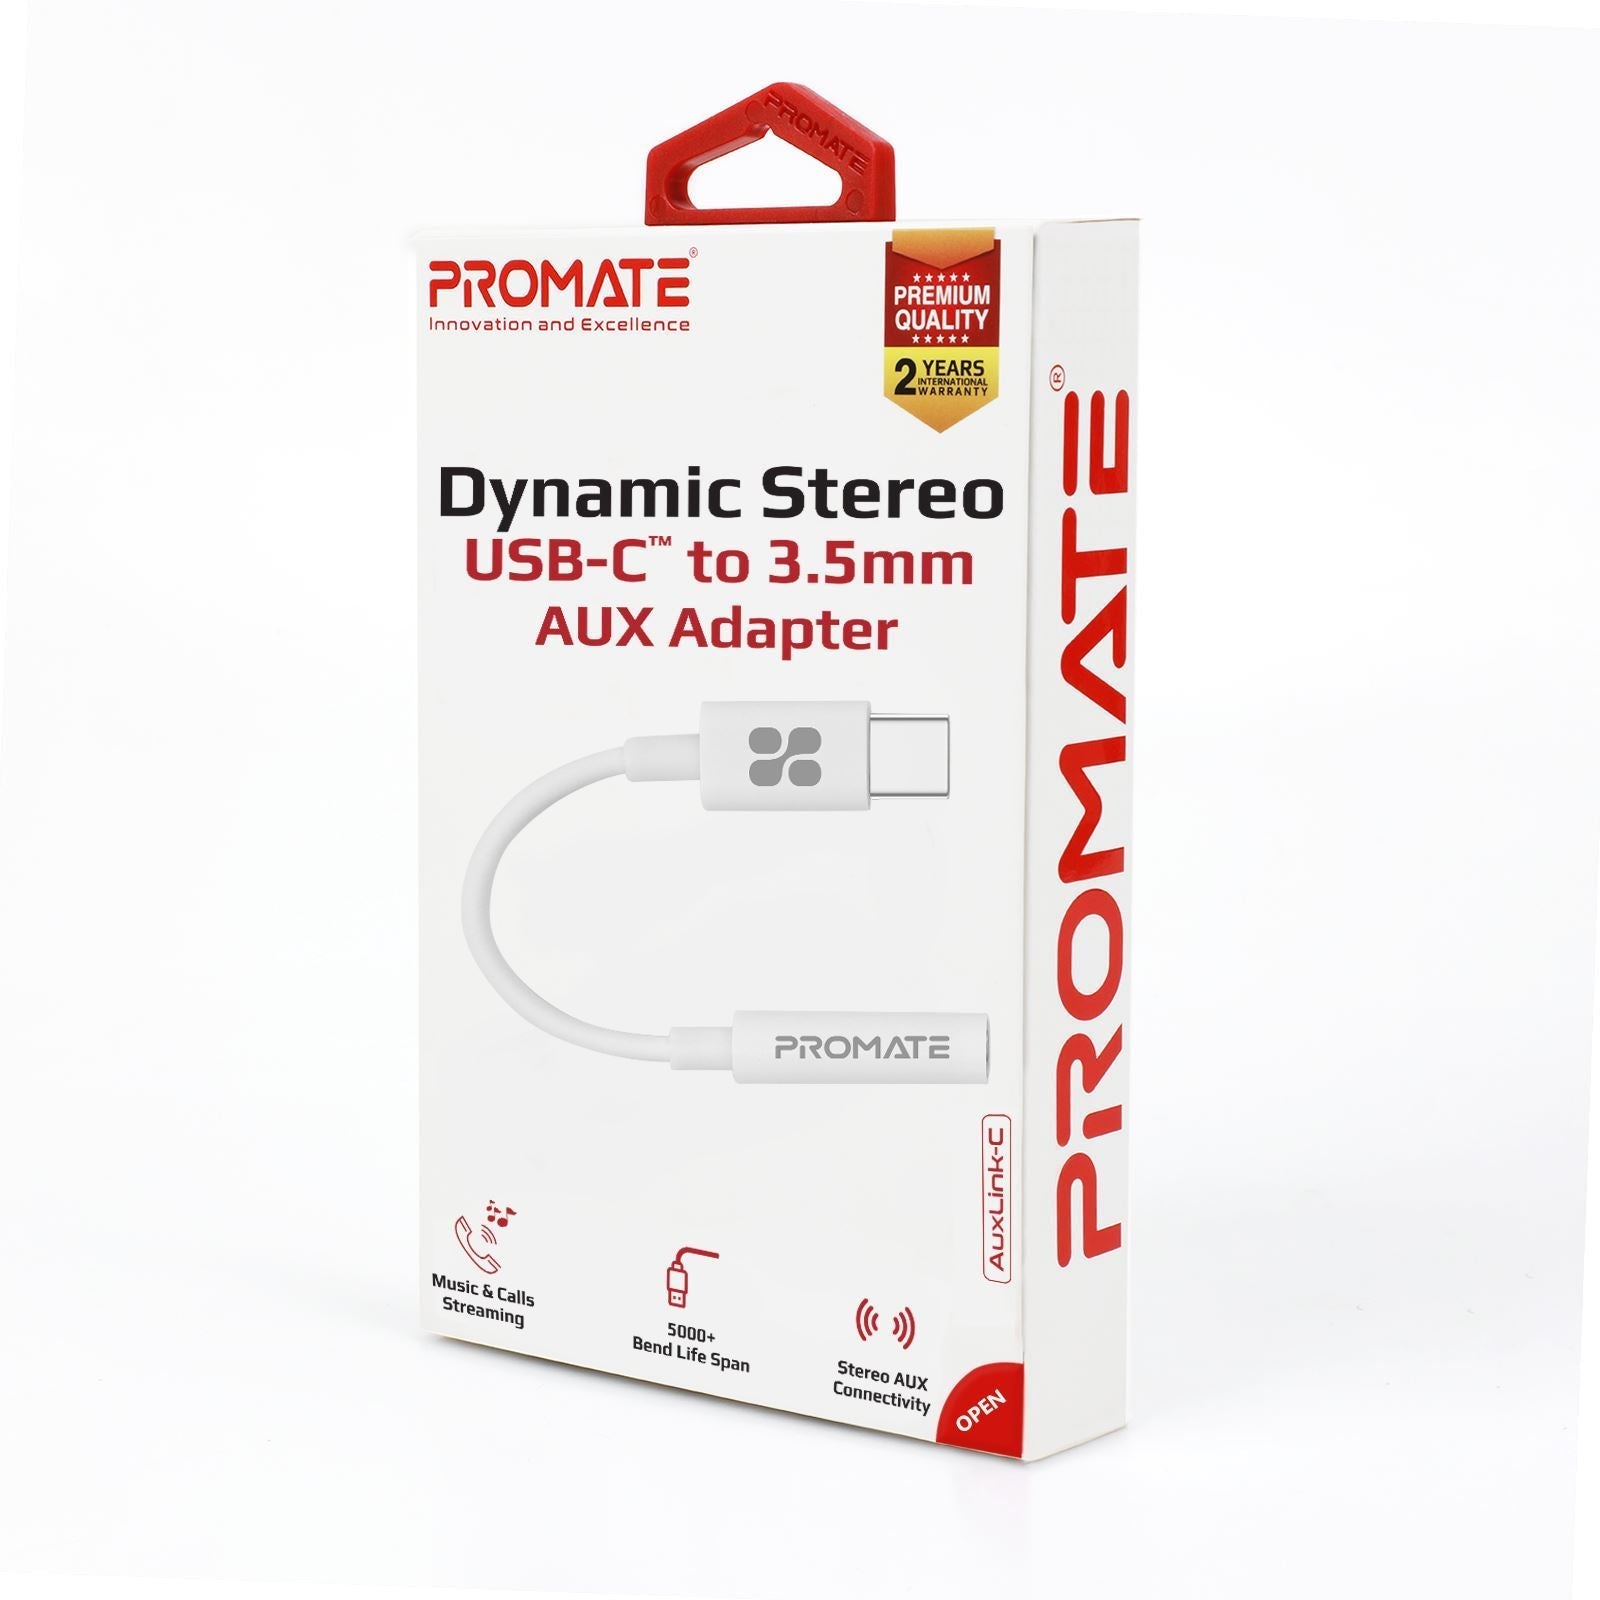 PROMATE_Dynamic_Stereo_USB-C_to_3.5mm_AUX_Headhone_Jack_Adapter._Digital_to_Analog_Converter._Supports_Music_&_Calls,_120mm_Length._White_Colour. 150